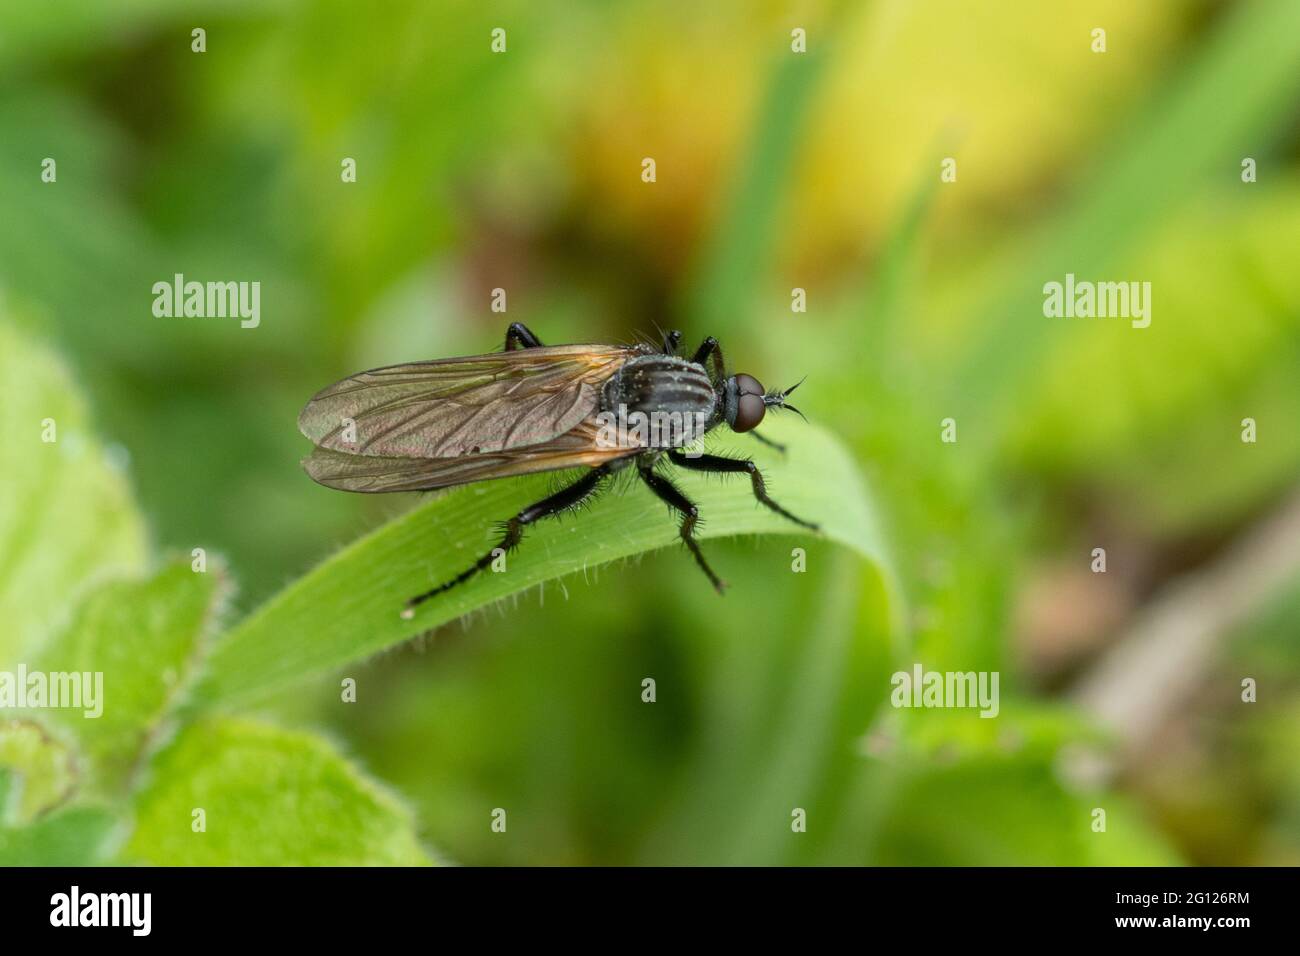 Bibio marci, also called St Mark's fly or Hawthorn fly, UK, during June Stock Photo